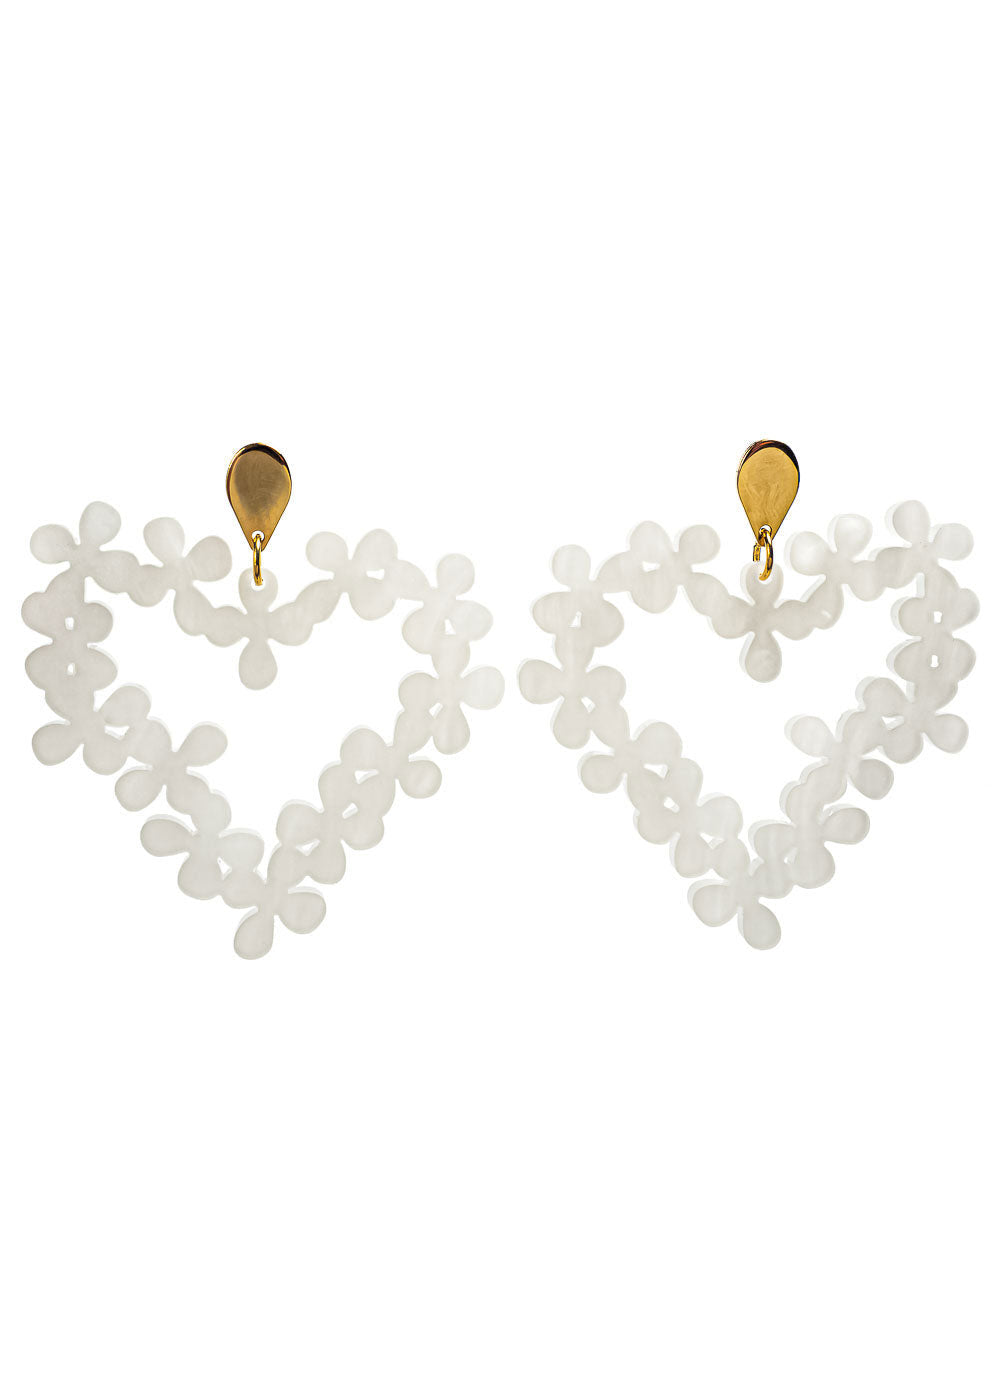 Toolally Hearts In Flowers Earrings - White Pearl